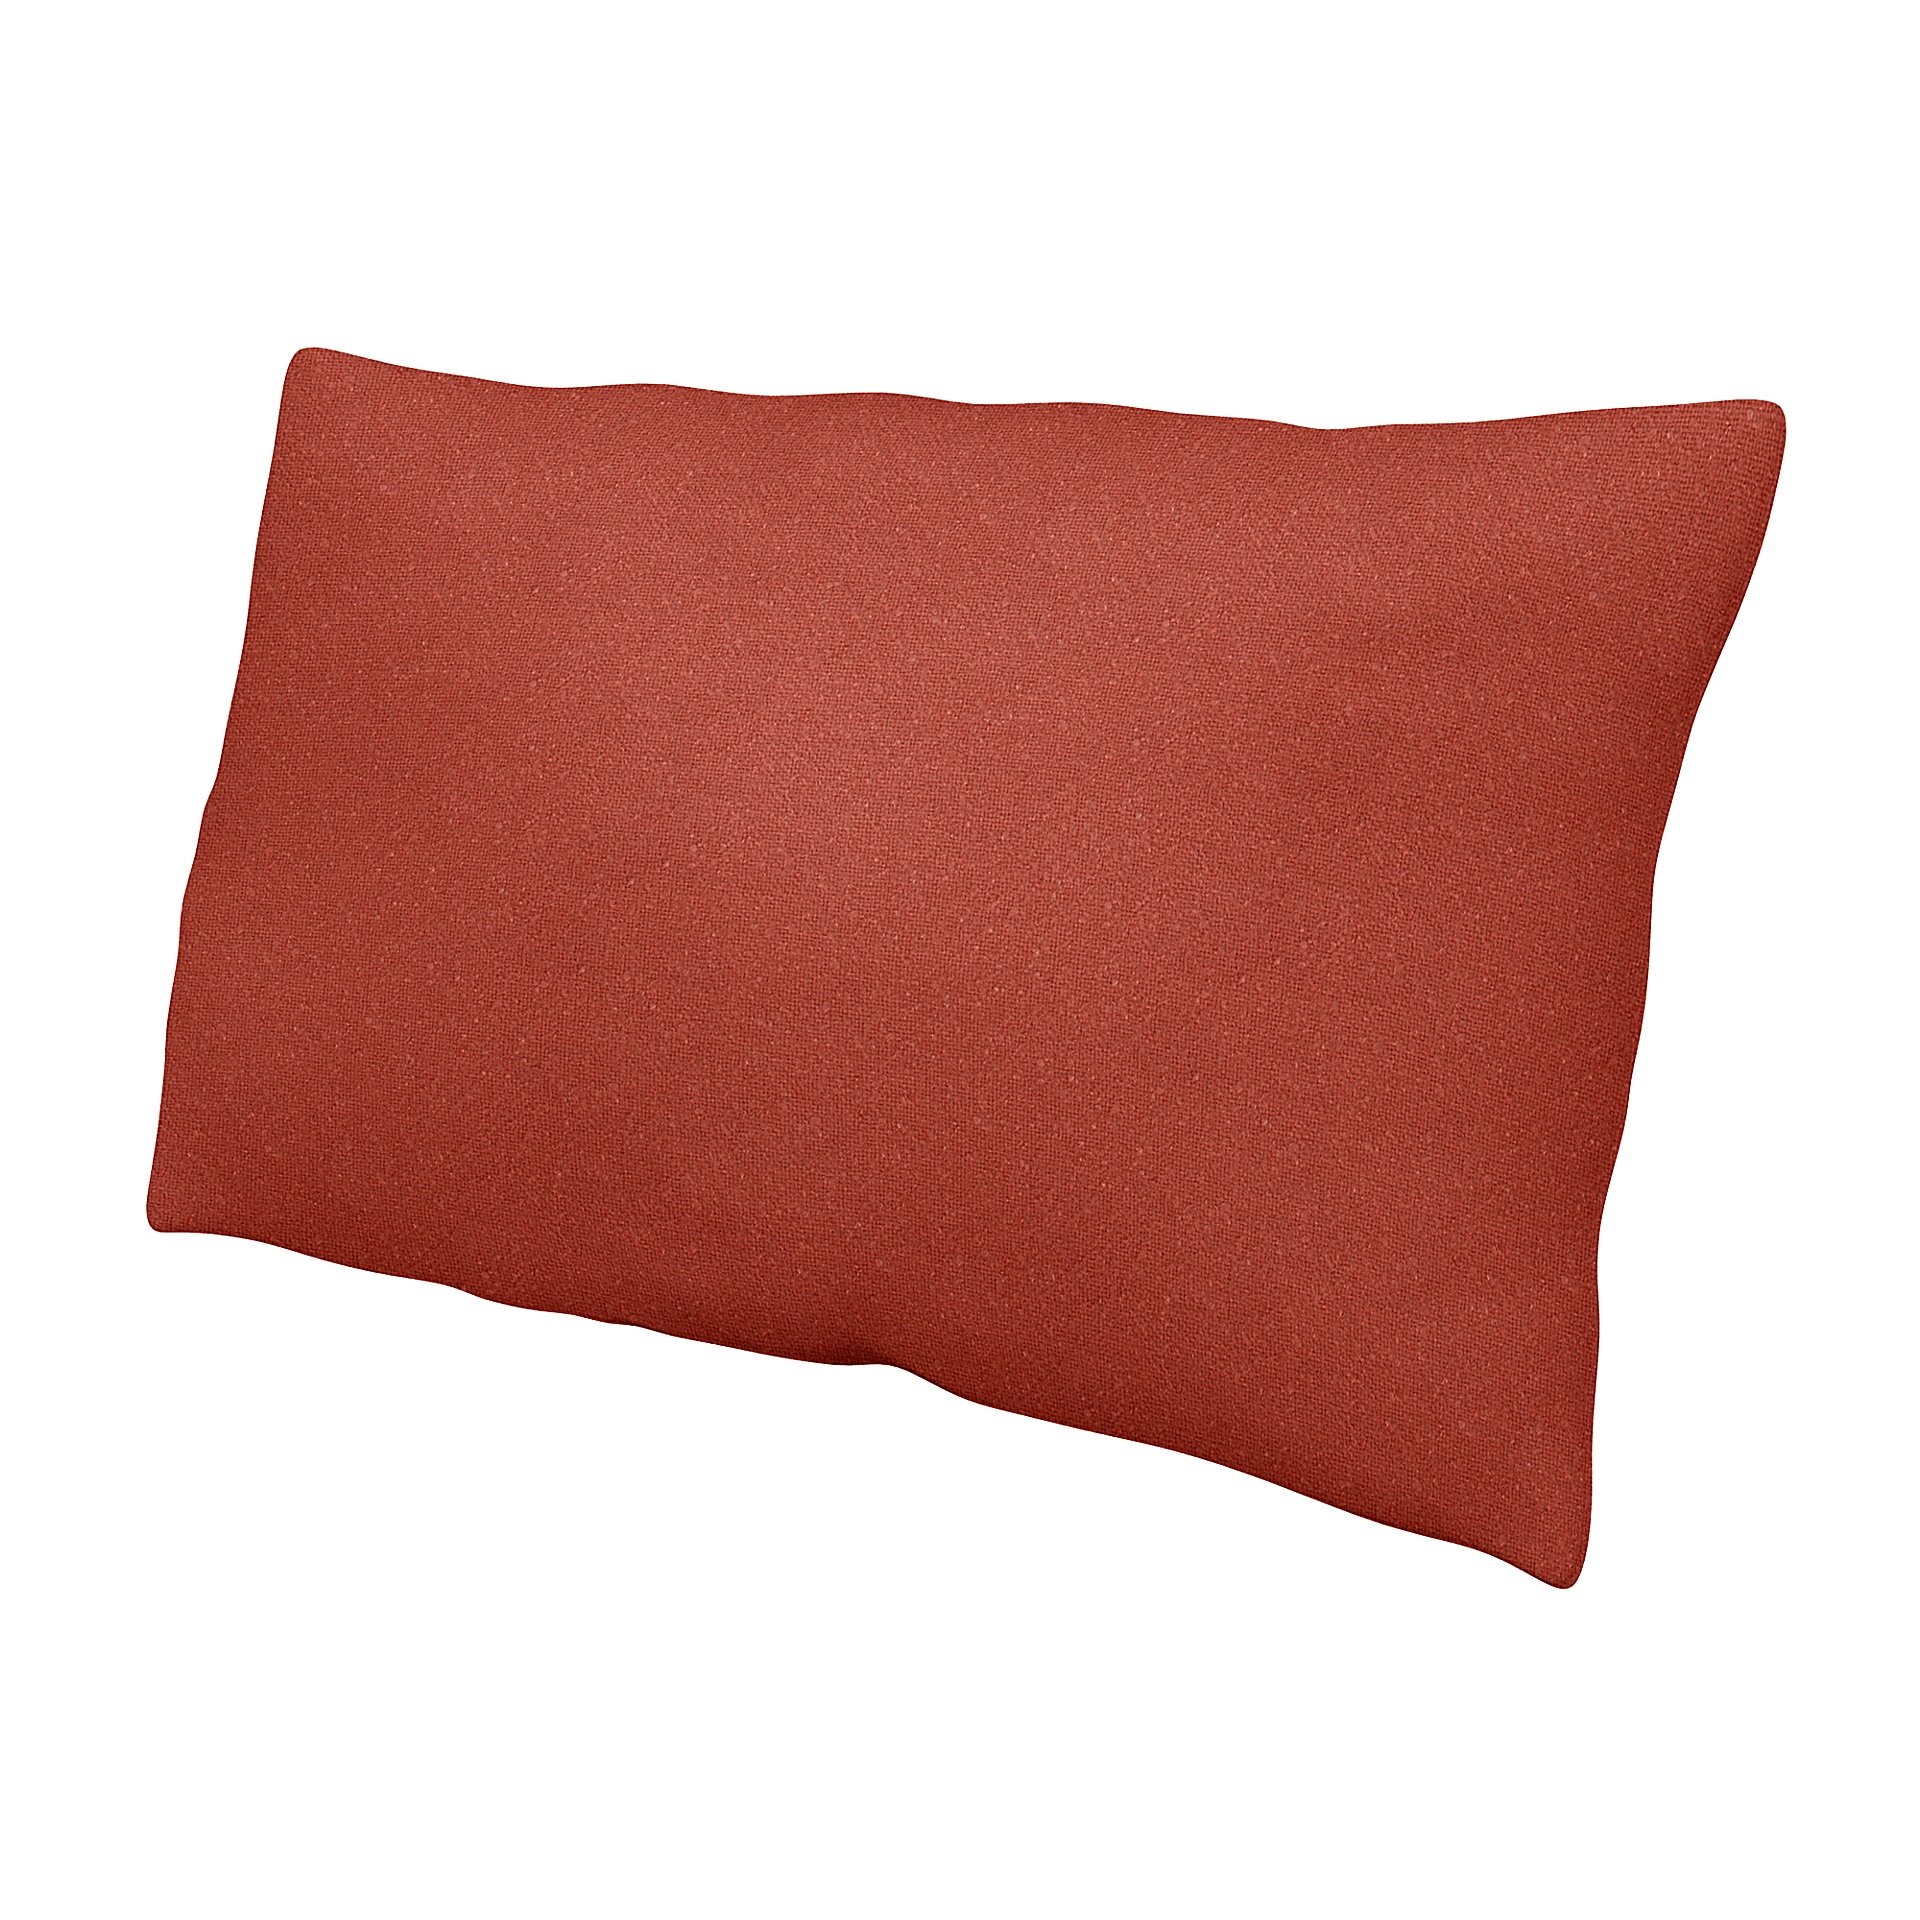 IKEA - Cushion Cover Ektorp 40x70 cm, Coral Red, Outdoor - Bemz